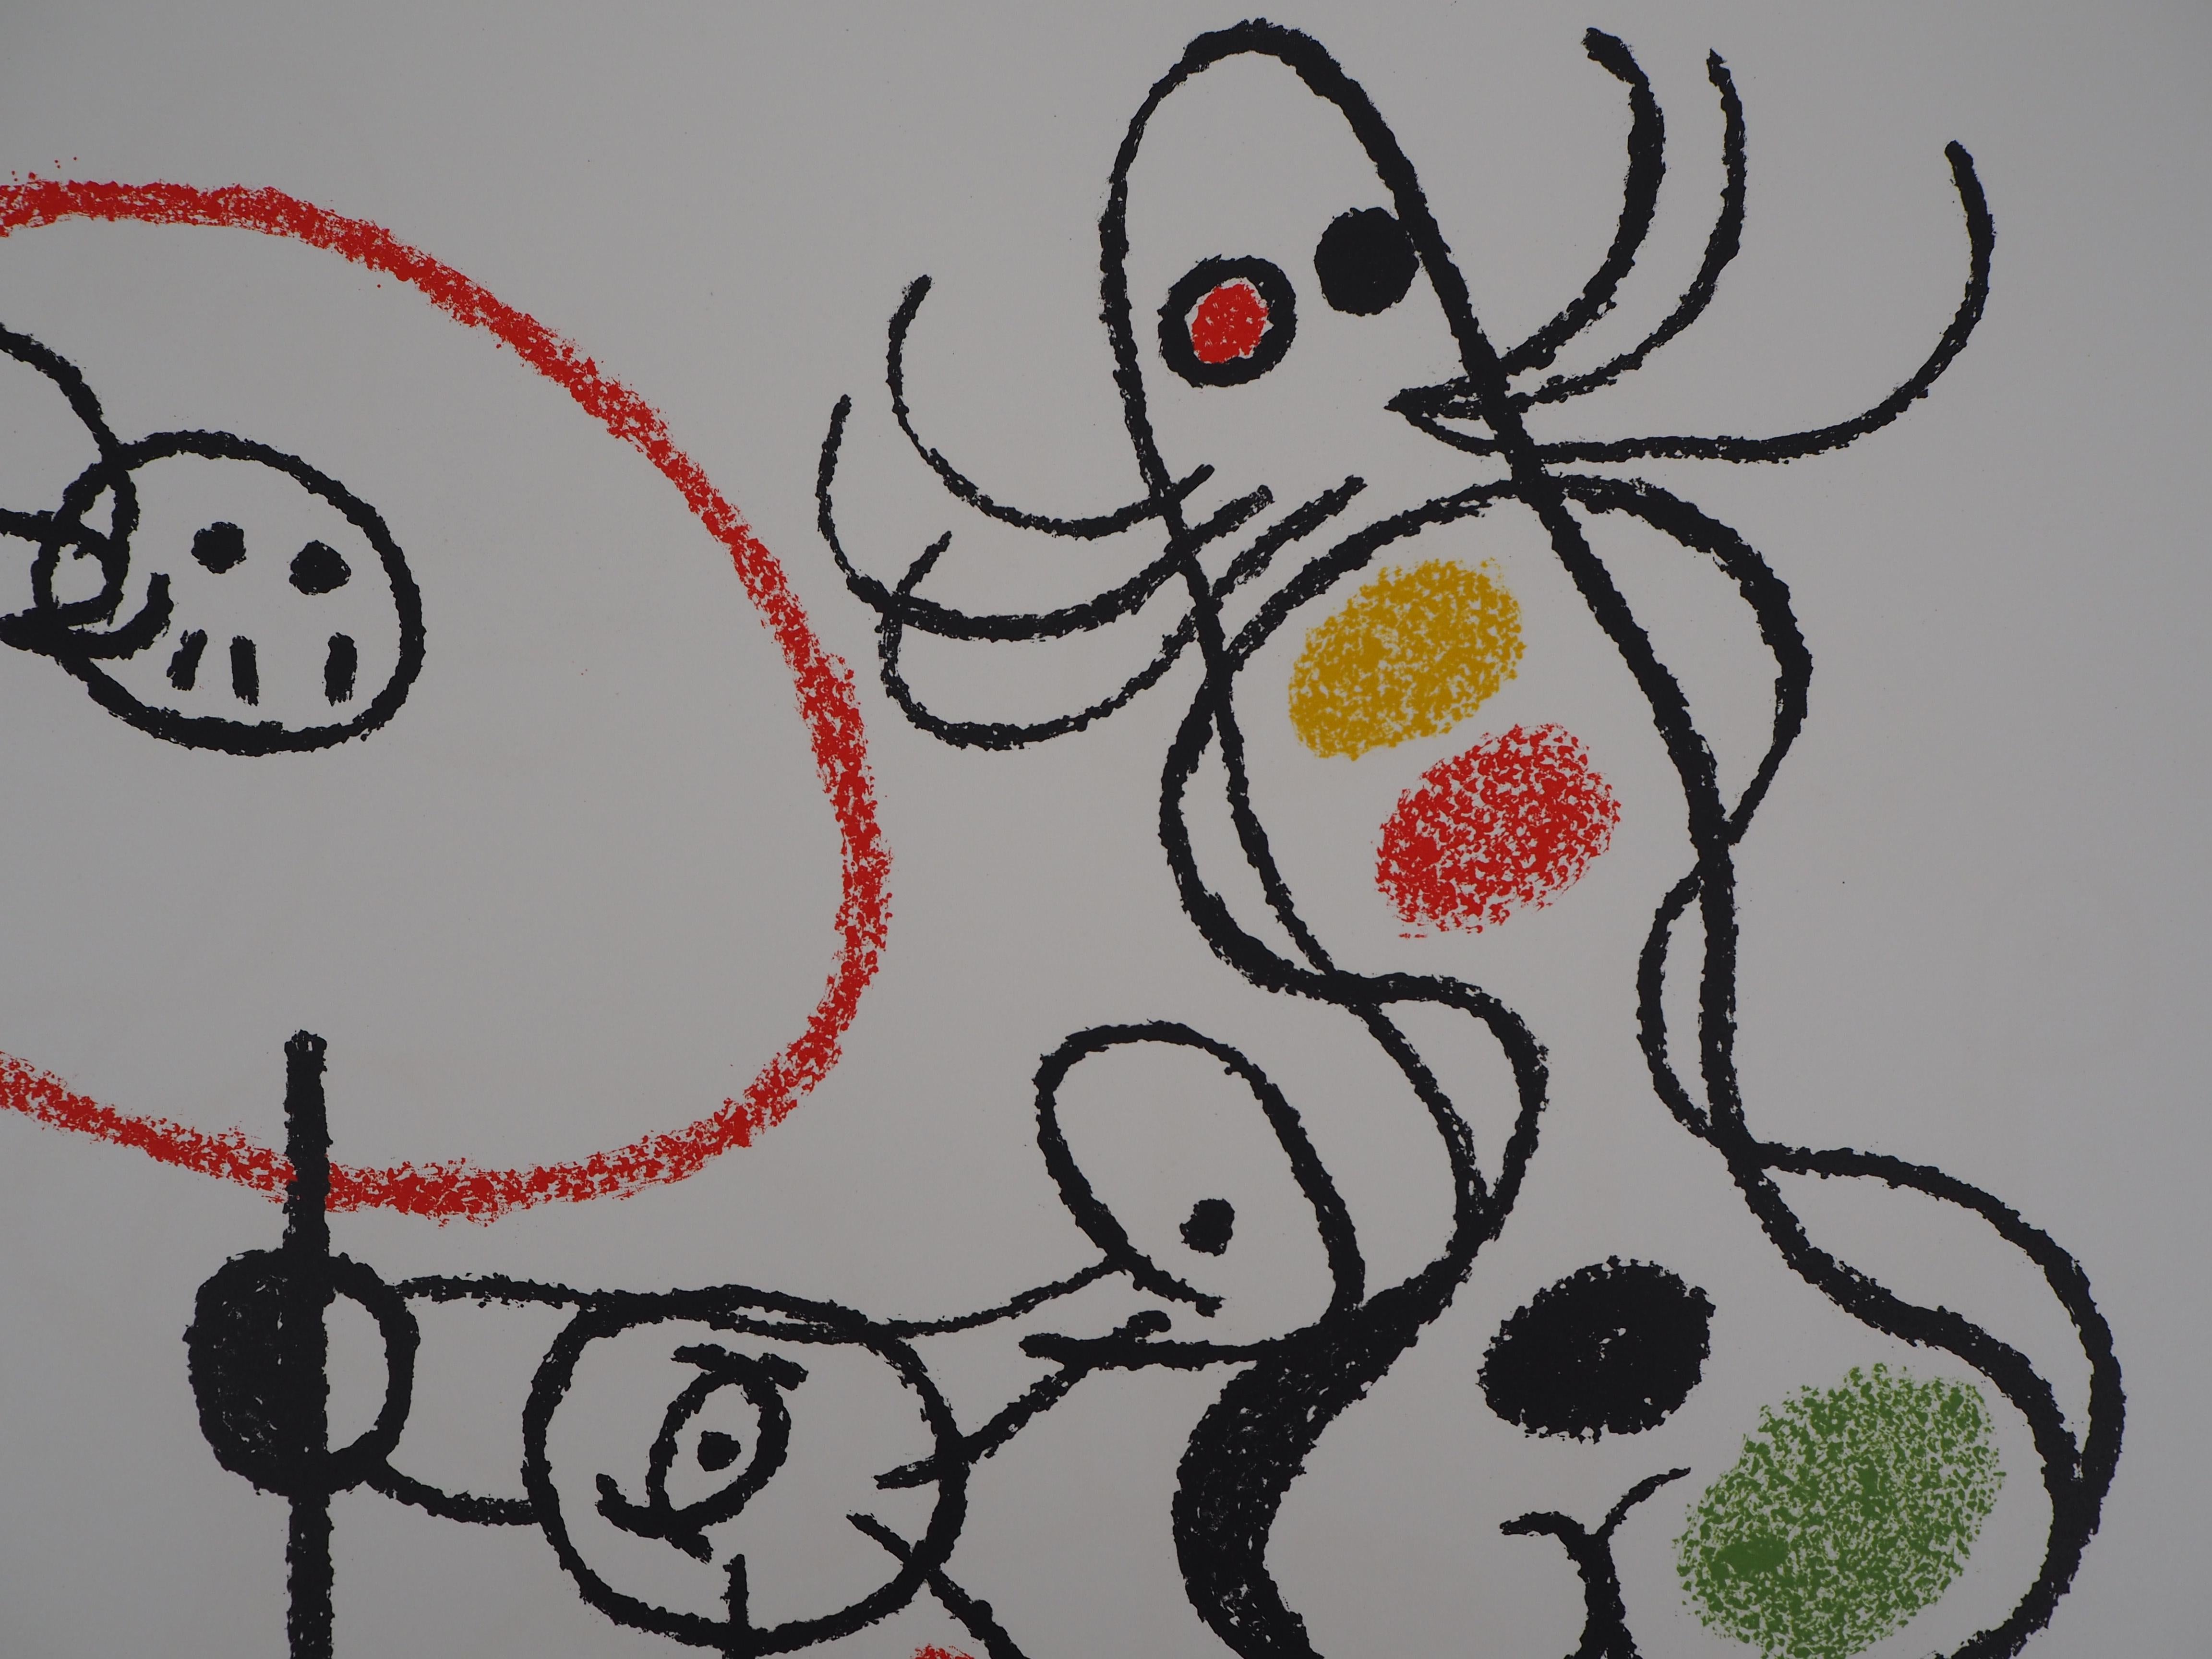 Ubu : Two Surrealist Figures - Original Handsigned Lithograph - Mourlot 1971 - Gray Abstract Print by Joan Miró